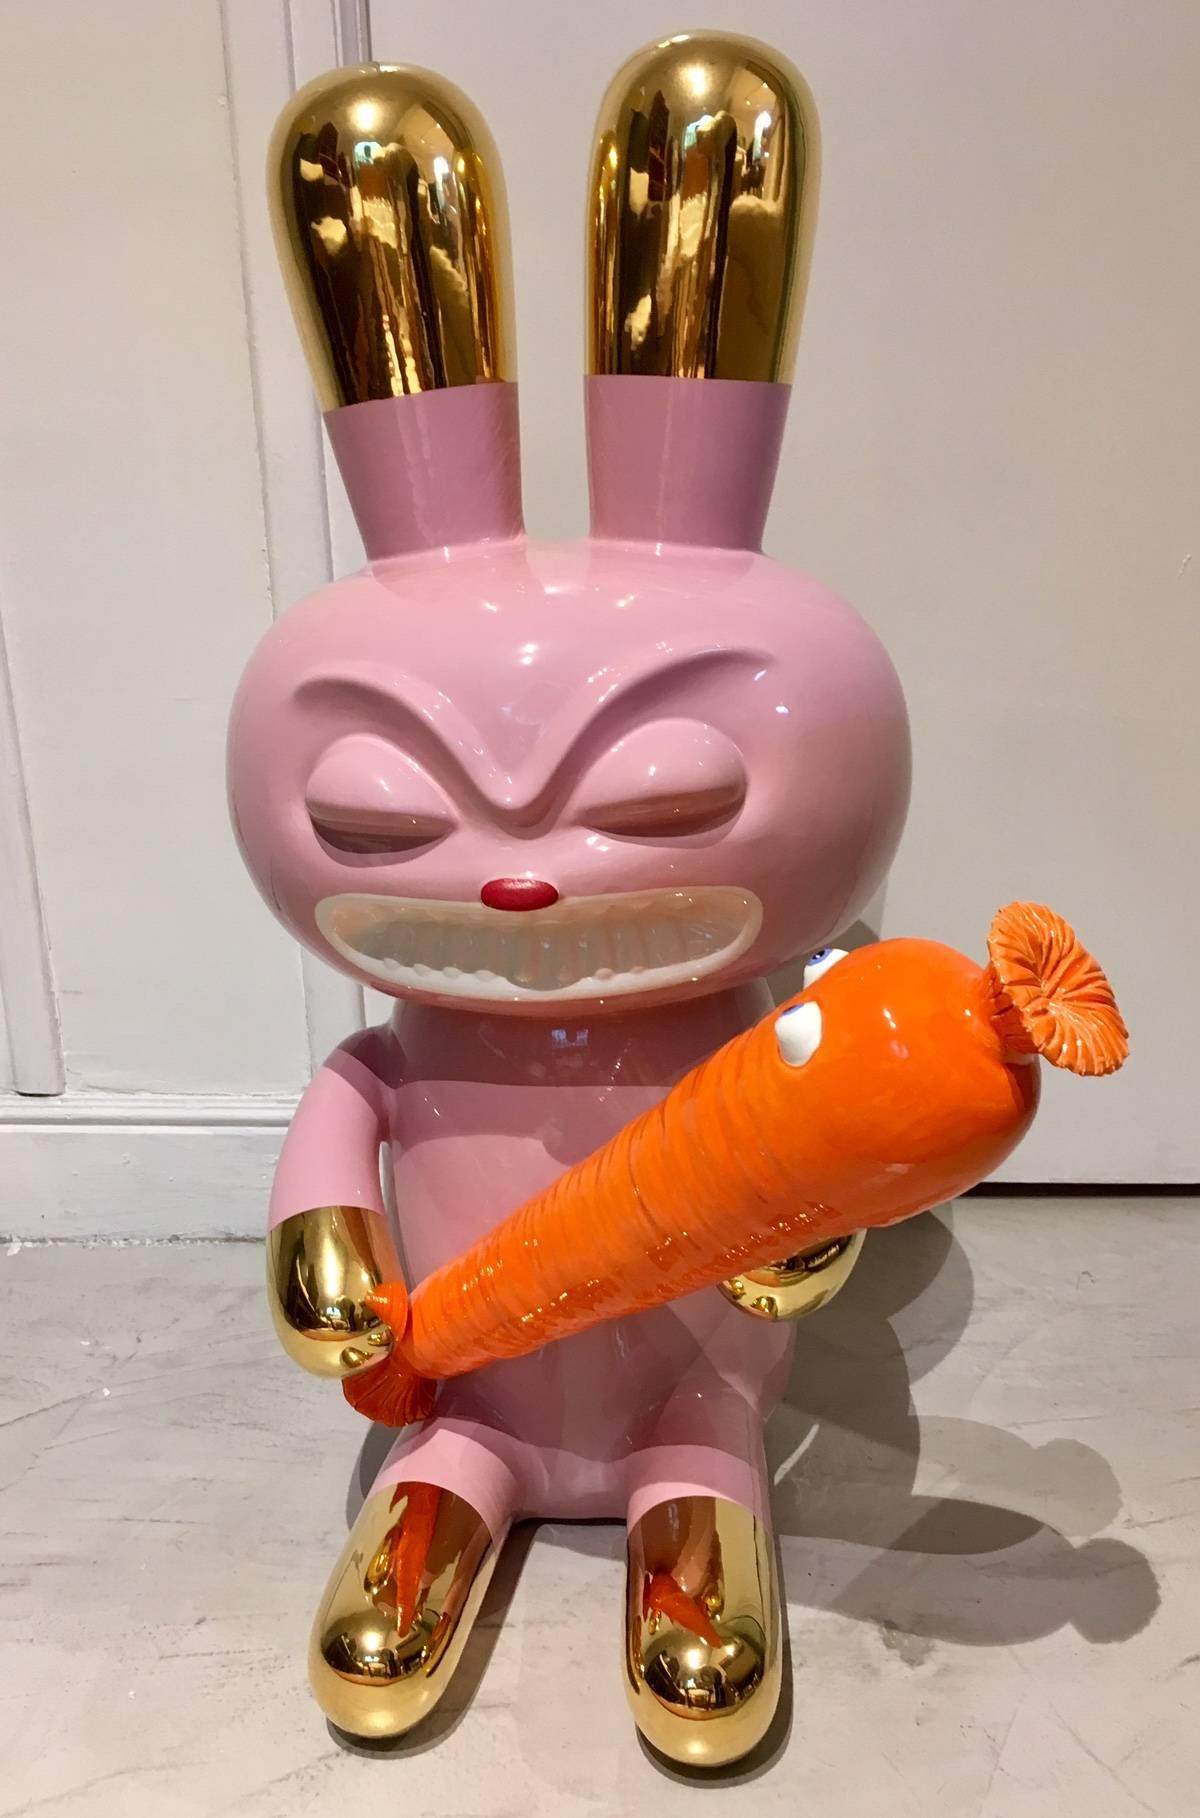 Limited edition earthenware sculpture in two pieces, representing a rabbit holding a carrot designed by Massimo Giacon. Polychrome ceramic from the collection “The pop will eat himself”. Produced by Superego, Italy. Artist's and producer's stamps